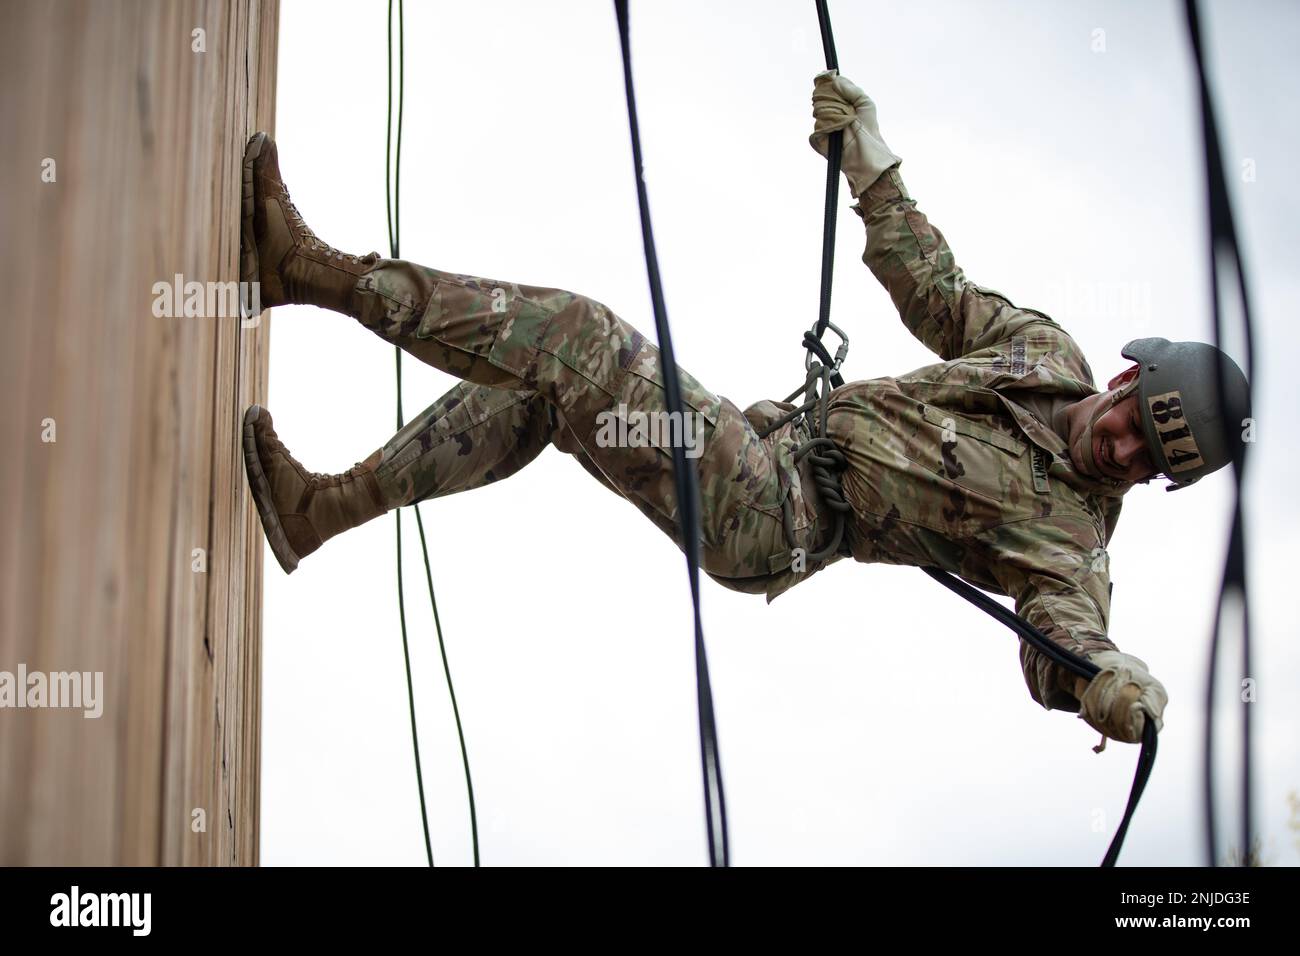 Sgt. Brady Verbrugge, a horizontal construction engineer with Company A, 224th Bridgade Engineer Battalion, Iowa National Guard, rappels from a 34-foot tower at Camp Dodge in Johnston, Iowa, on Sept. 6, 2022. Over 200 Soldiers and Airmen participated in a 12-day U.S. Army Air Assault course held at Camp Dodge, which trains service members in sling-load operations and rappelling as well as being a test of grit. Stock Photo